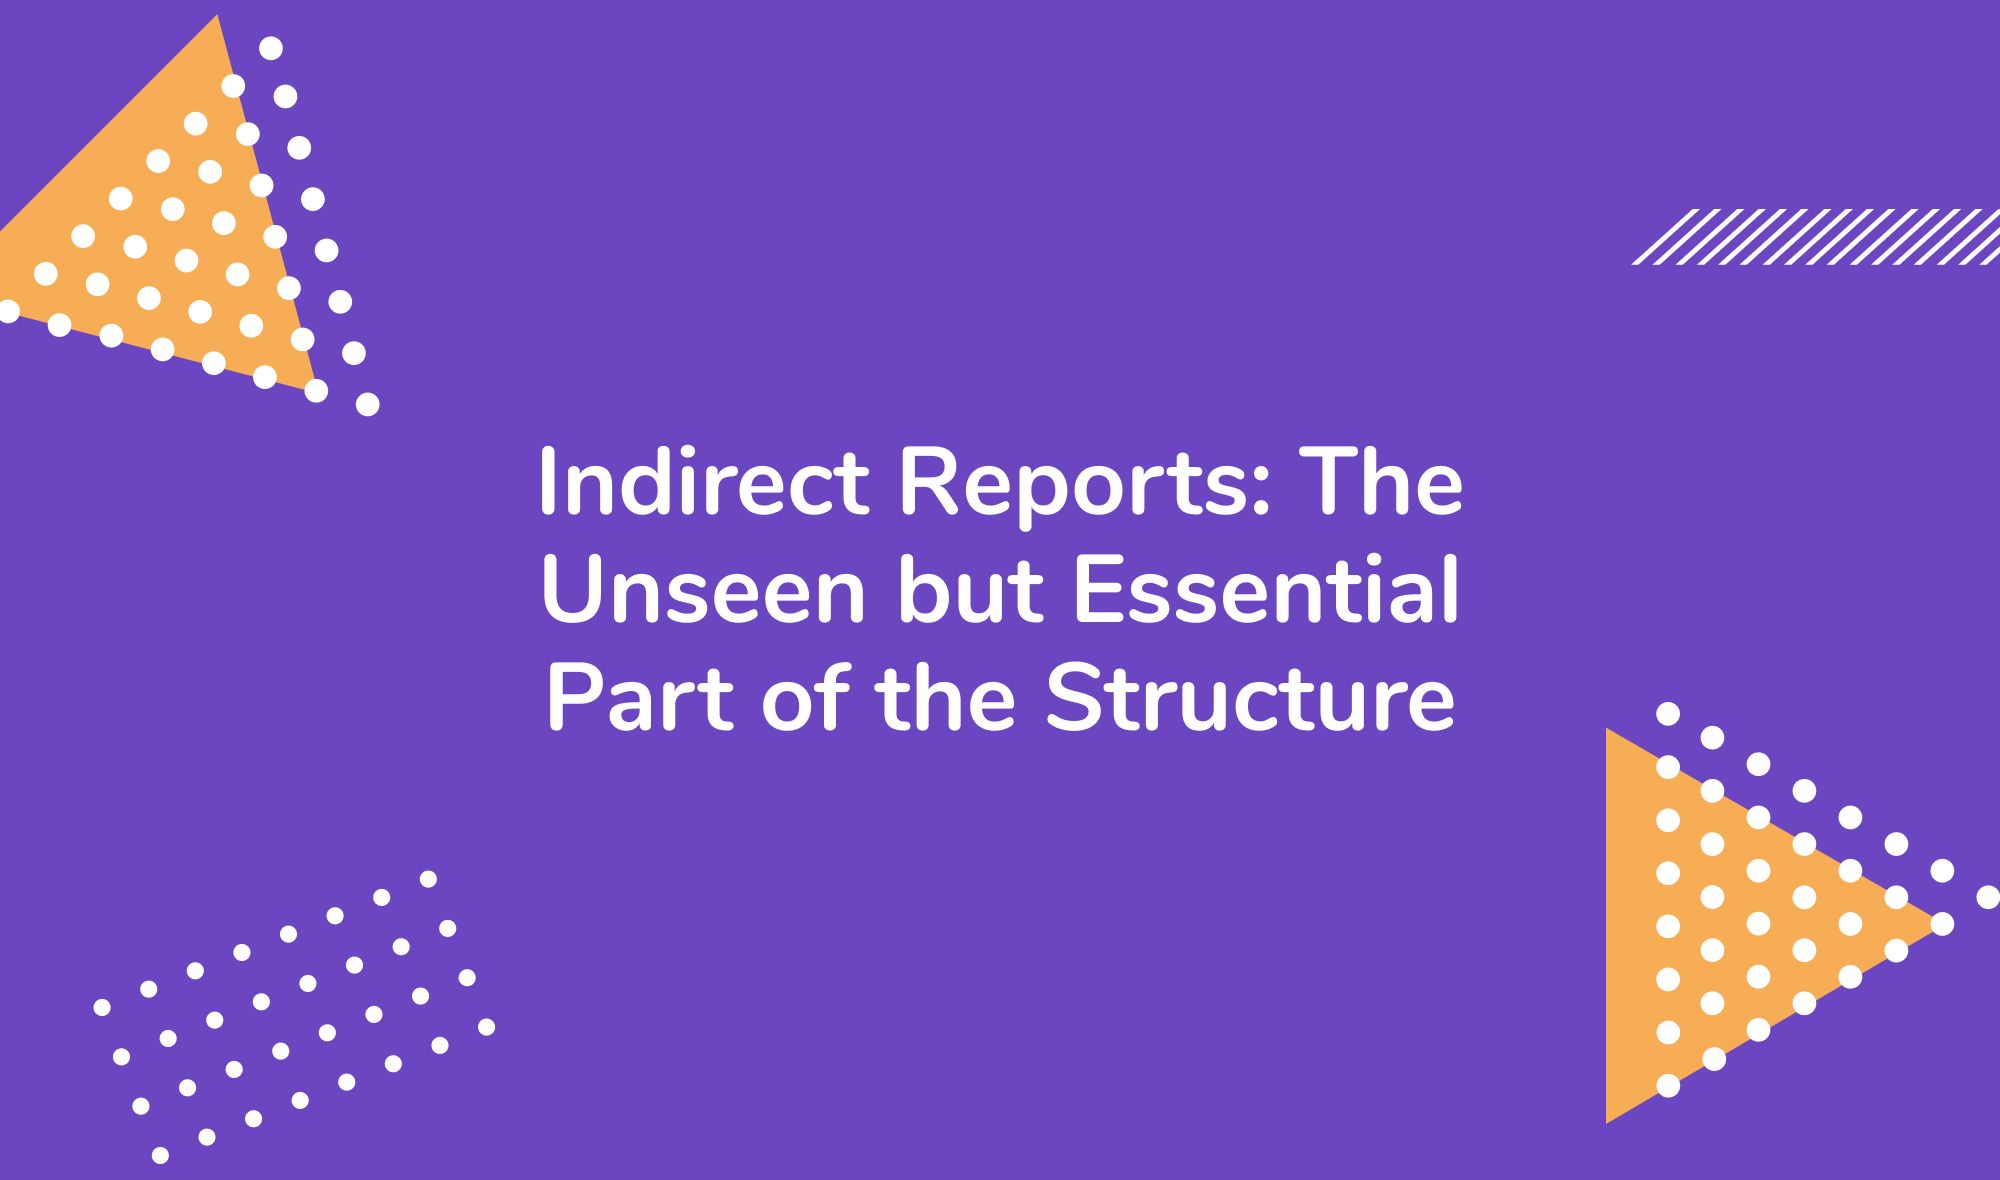 Indirect Reports: The Unseen but Essential Part of the Structure